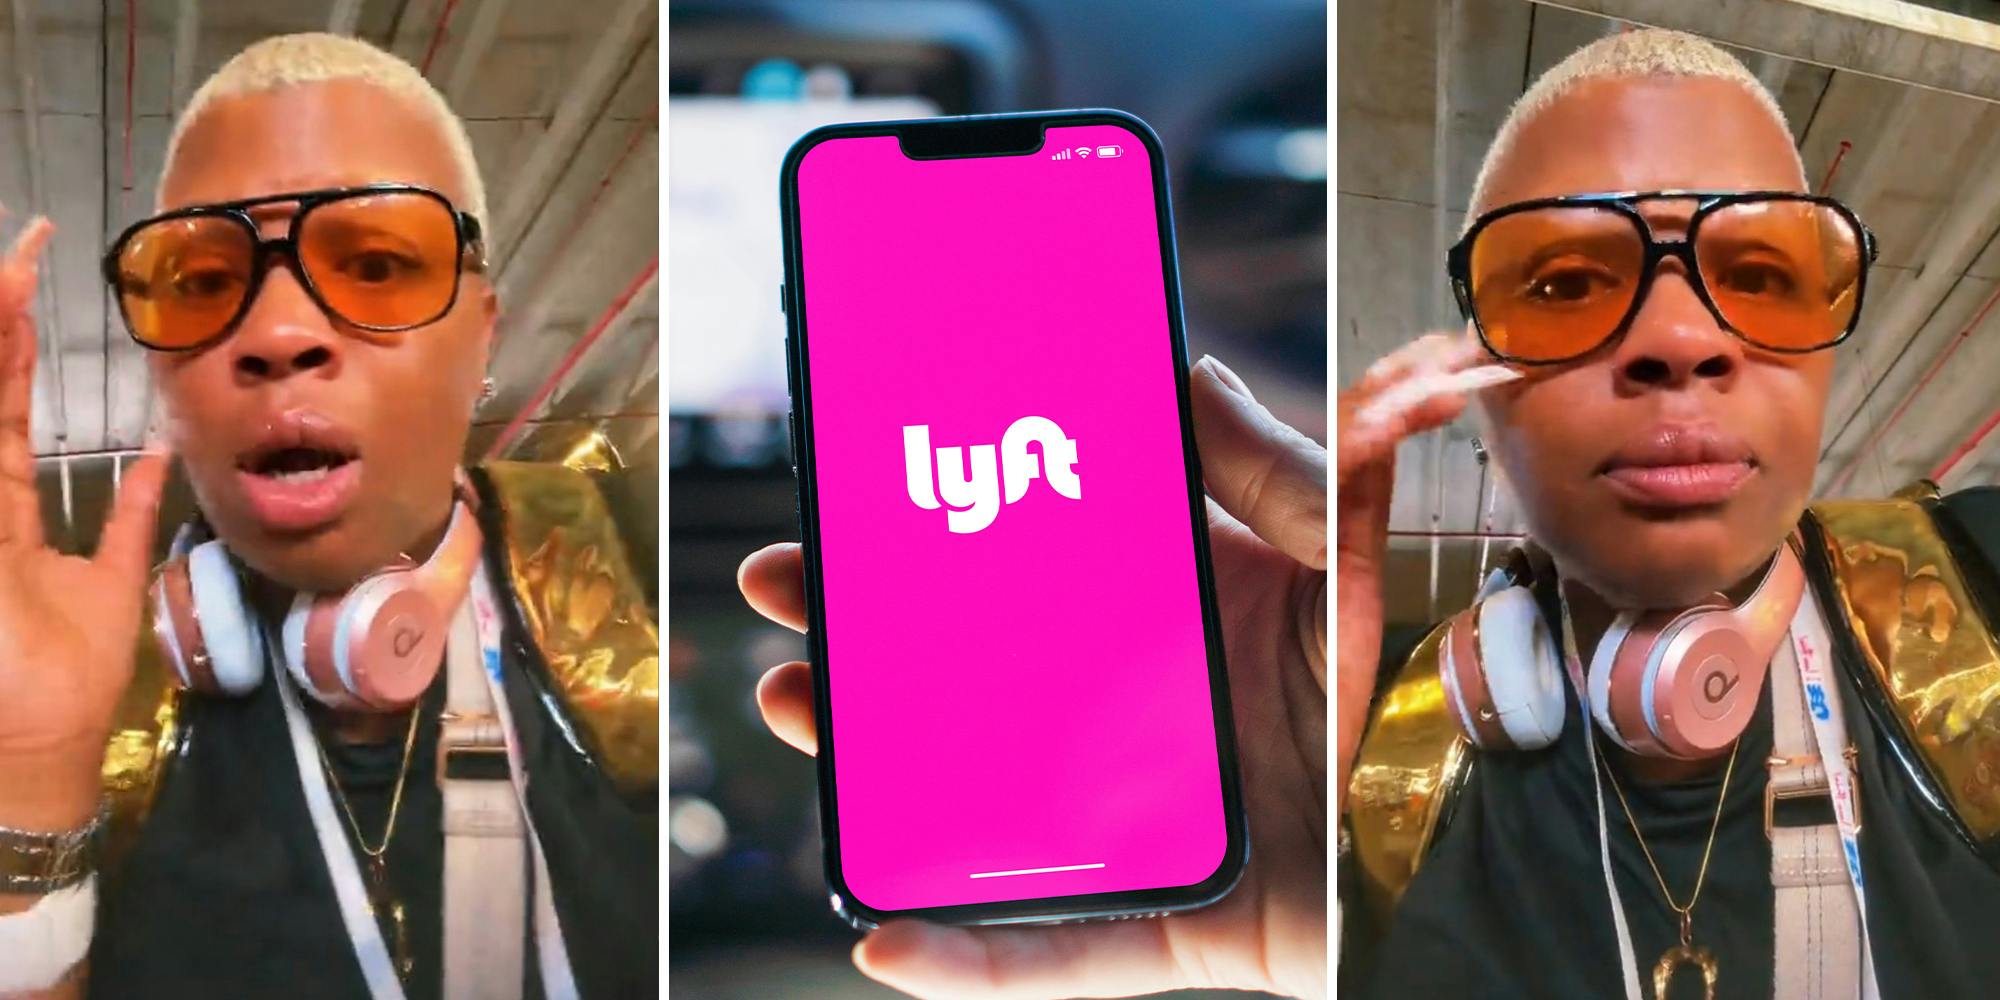 Woman calls $70 Lyft. Driver kicks her out after she refused to pay him directly